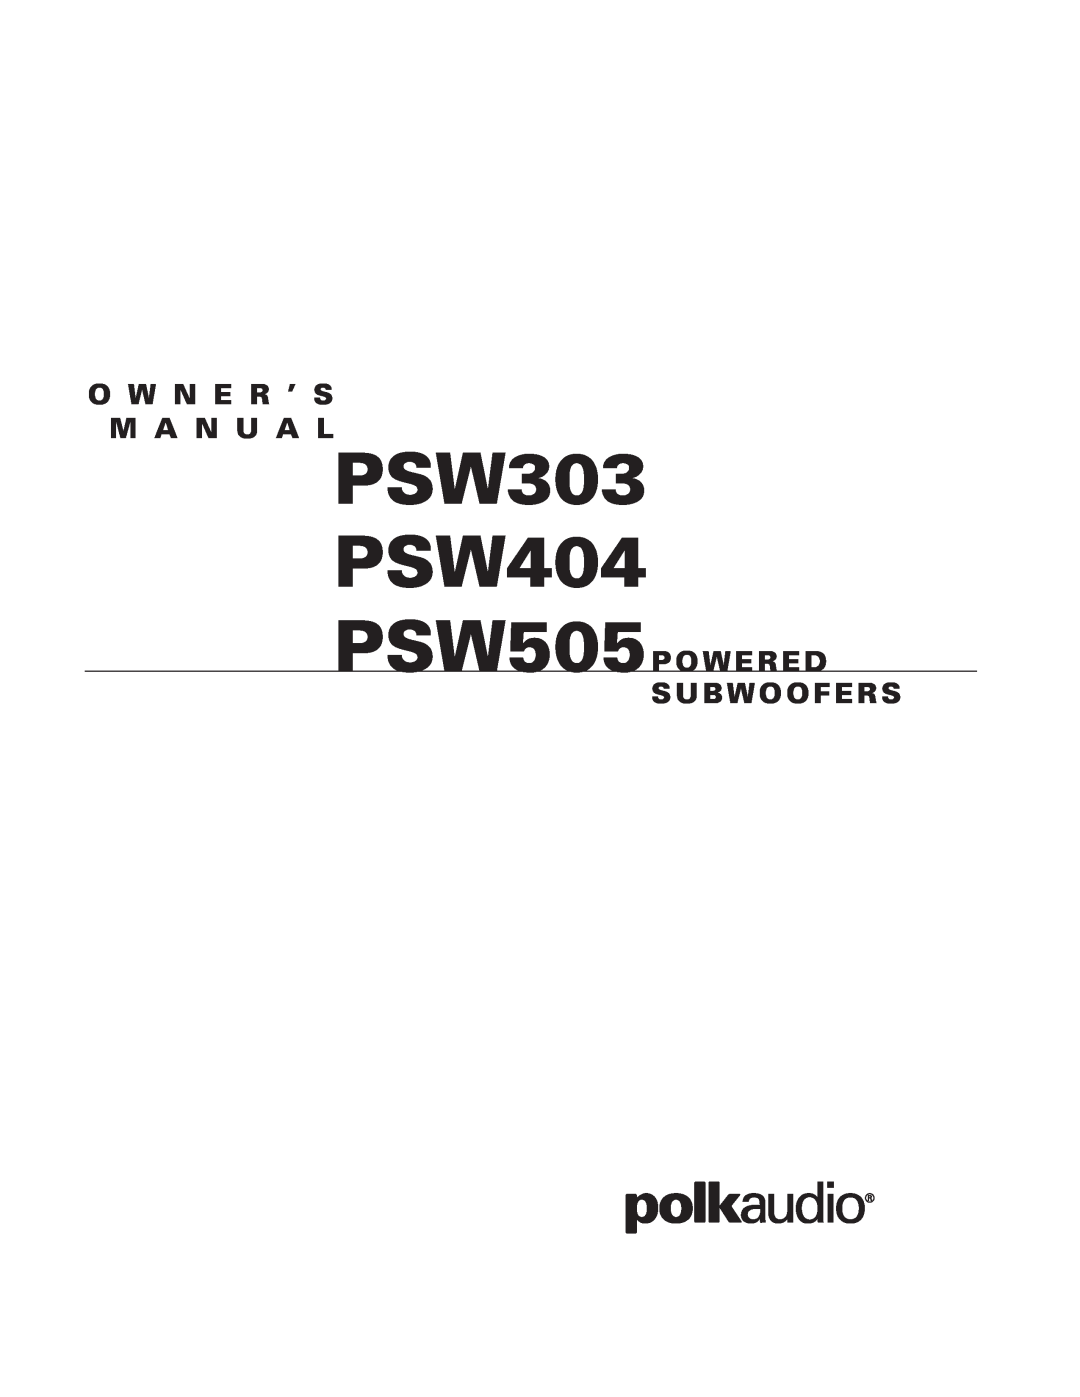 Polk Audio owner manual PSW303 PSW404, O W N E R ’ S M A N U A L, PSW505POWERED SUBWOOFERS 